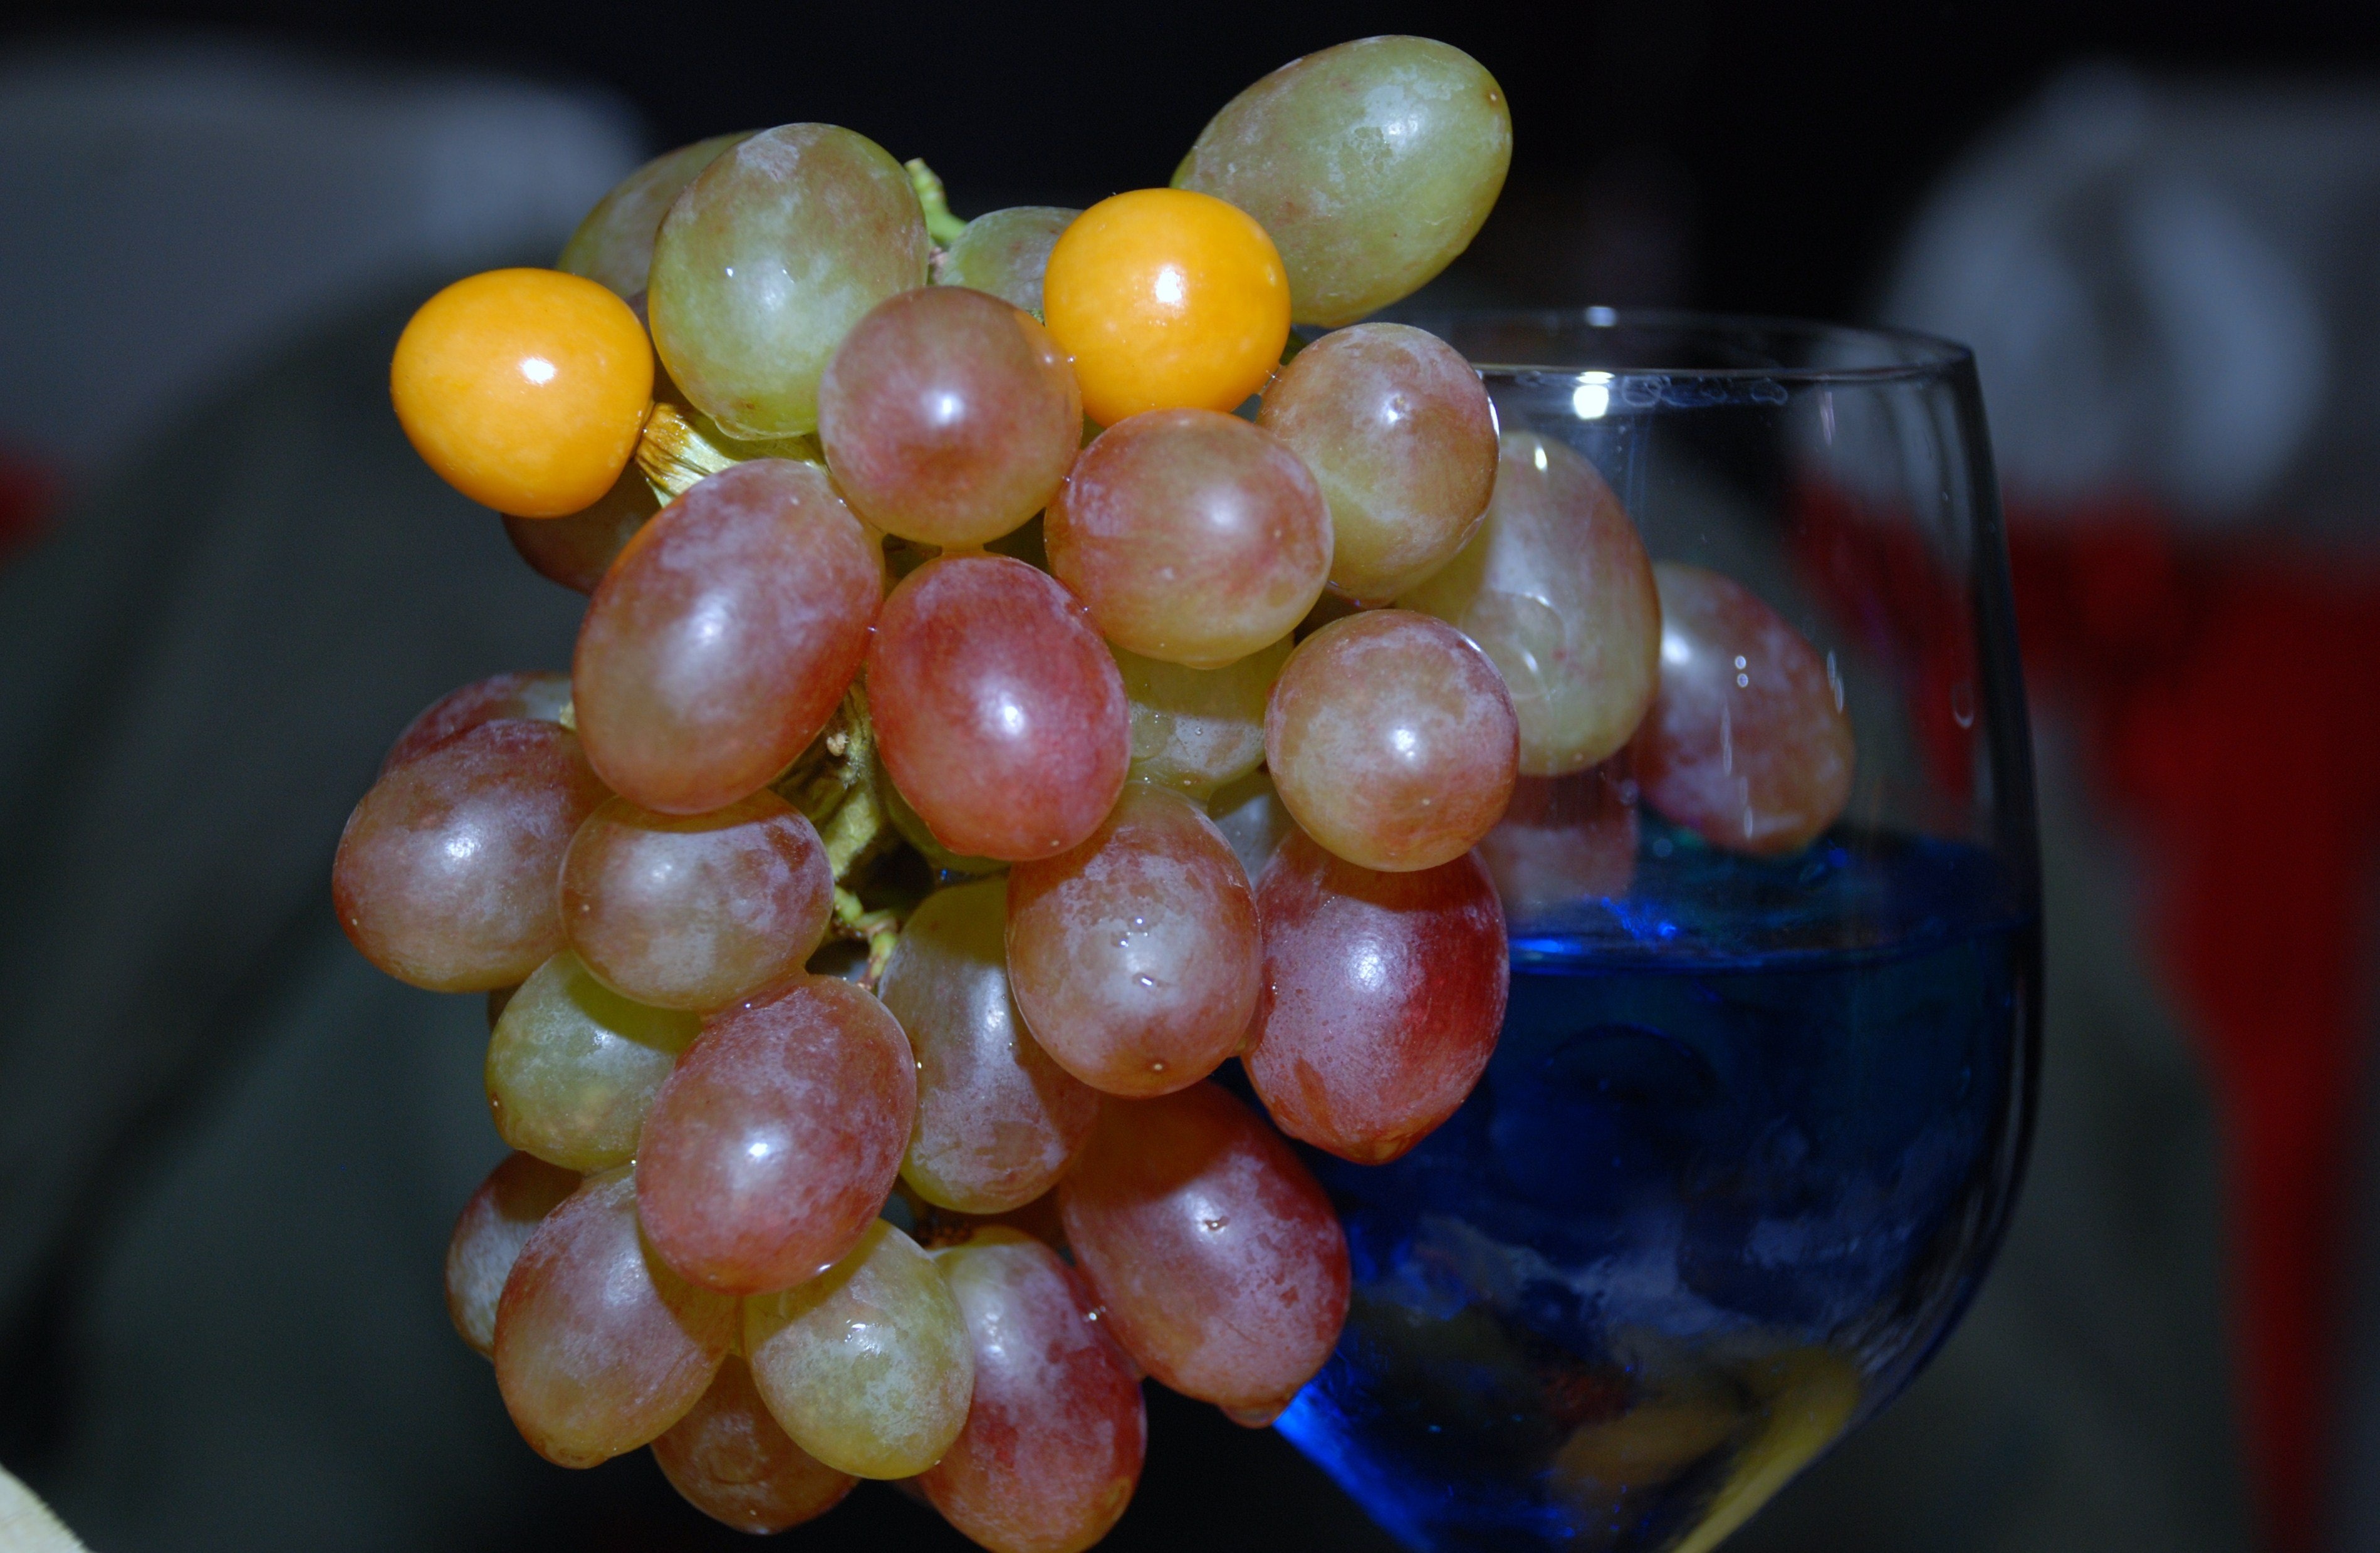 brown and green grapes lot